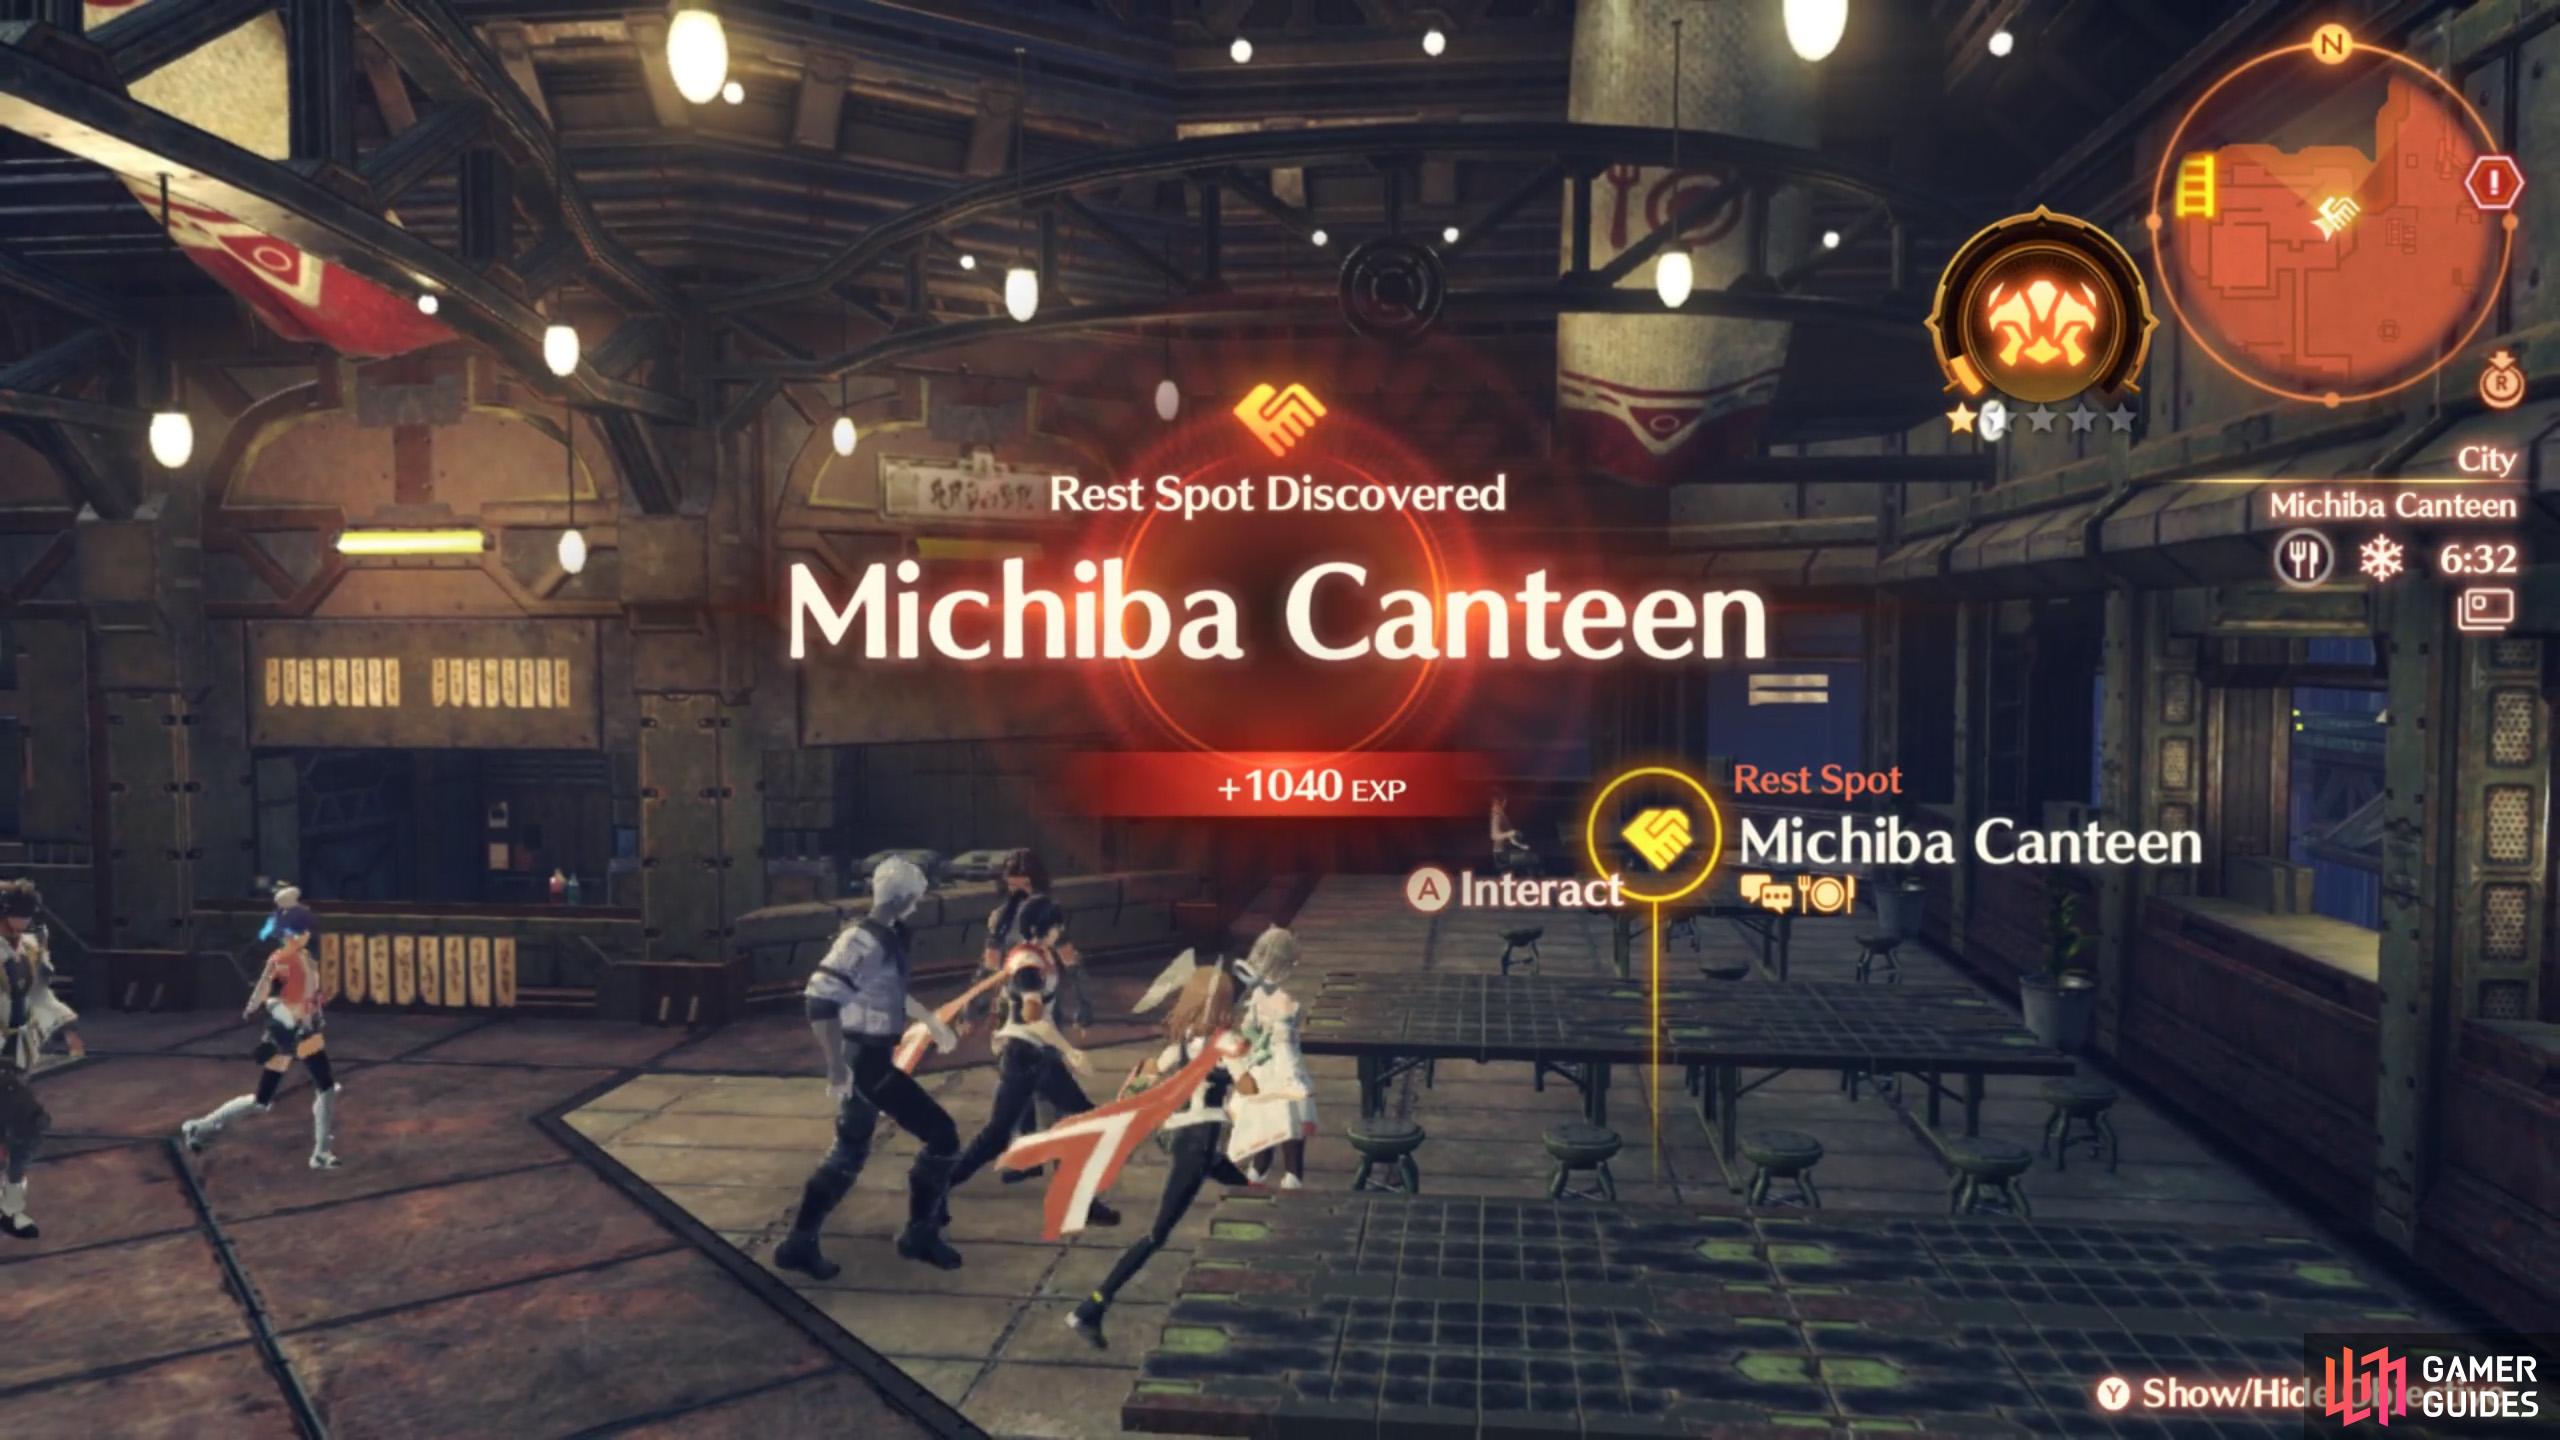 Order some food from Michiba Canteen!